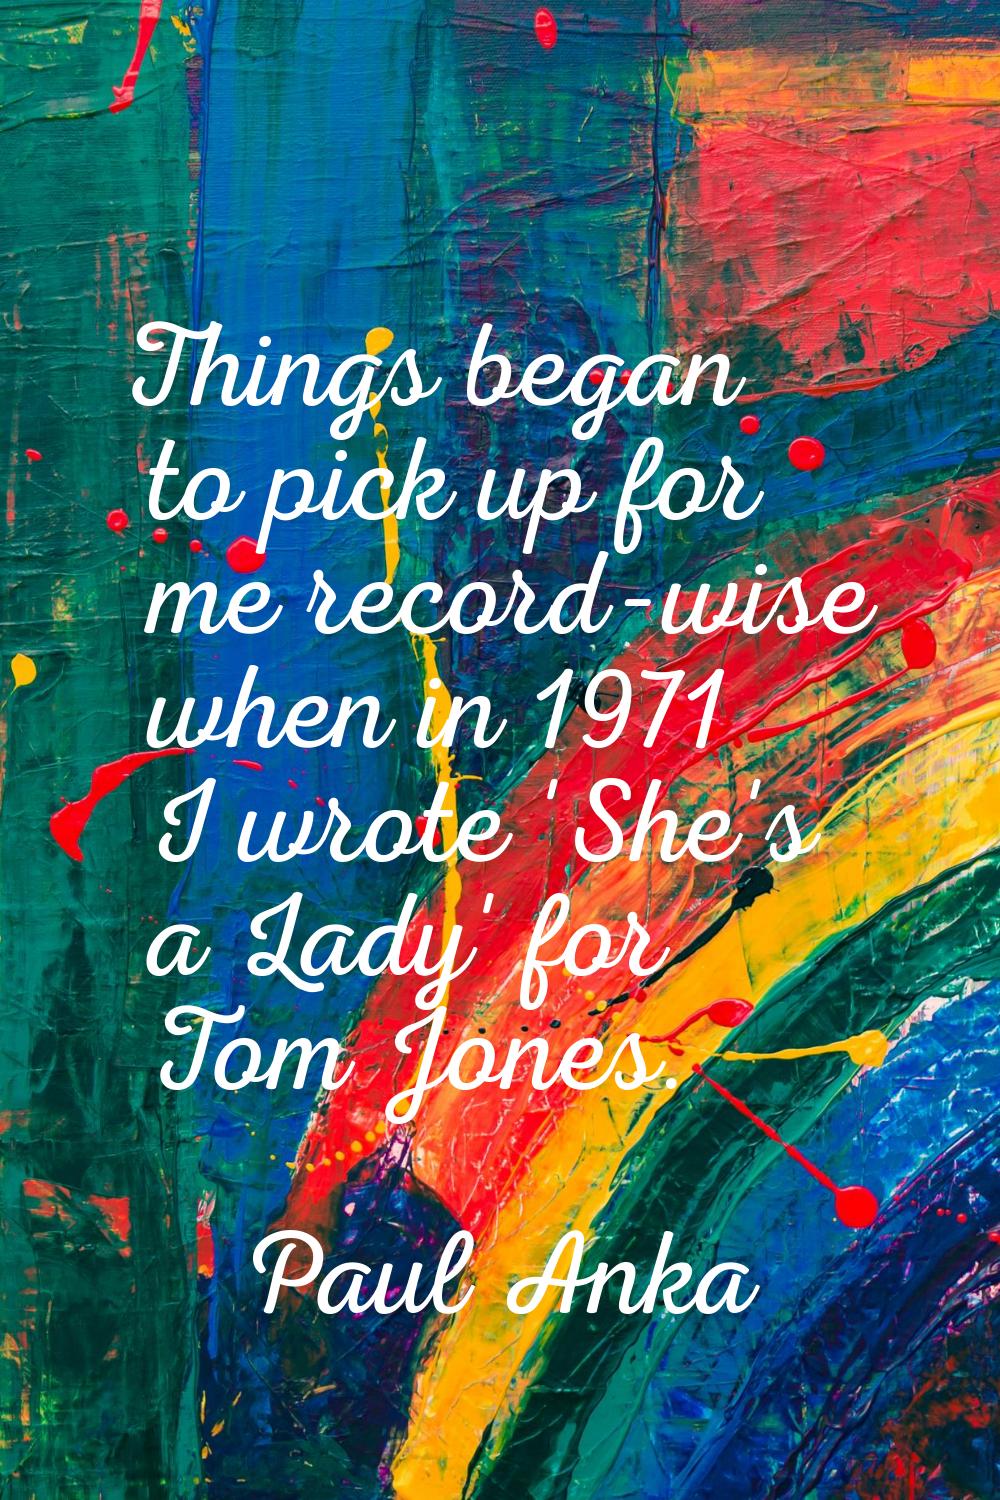 Things began to pick up for me record-wise when in 1971 I wrote 'She's a Lady' for Tom Jones.